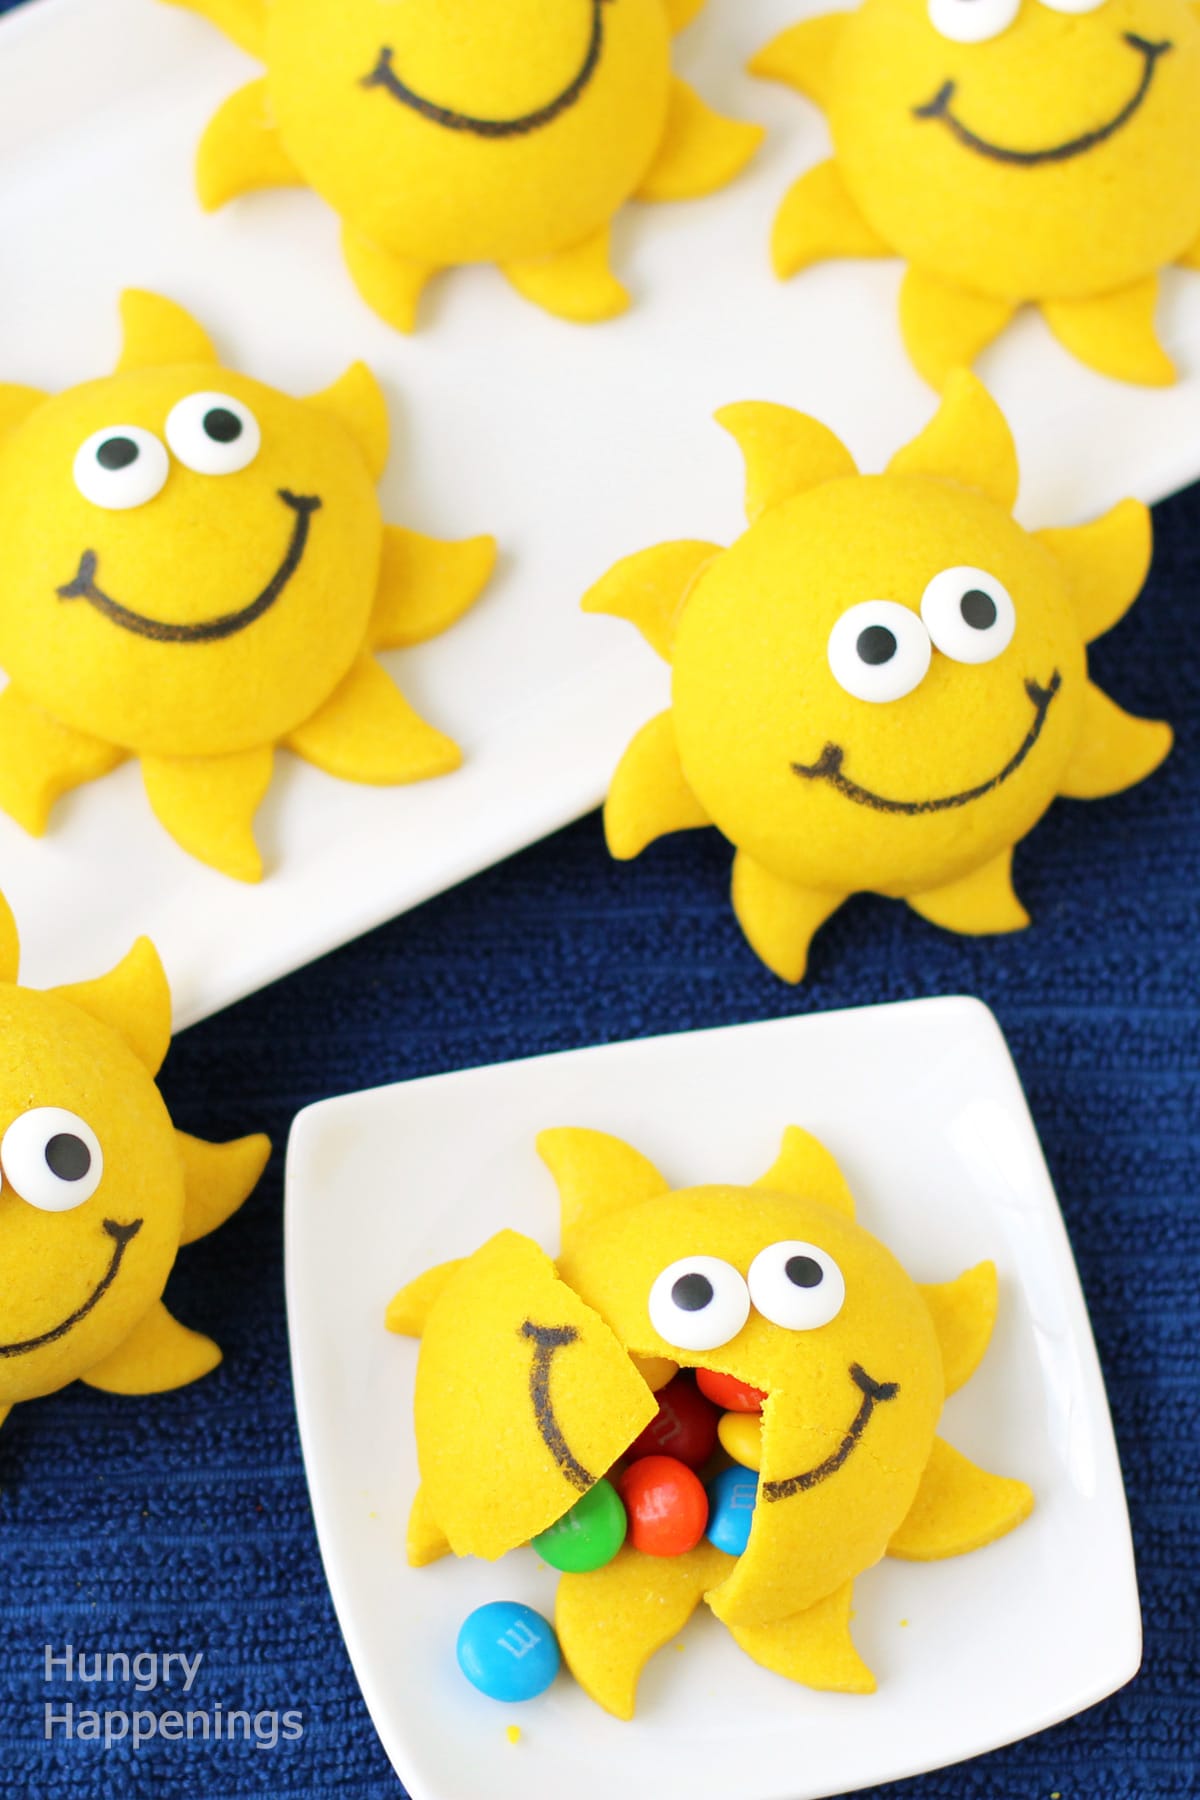 smiley face sunshine cookies with candy hiding inside.